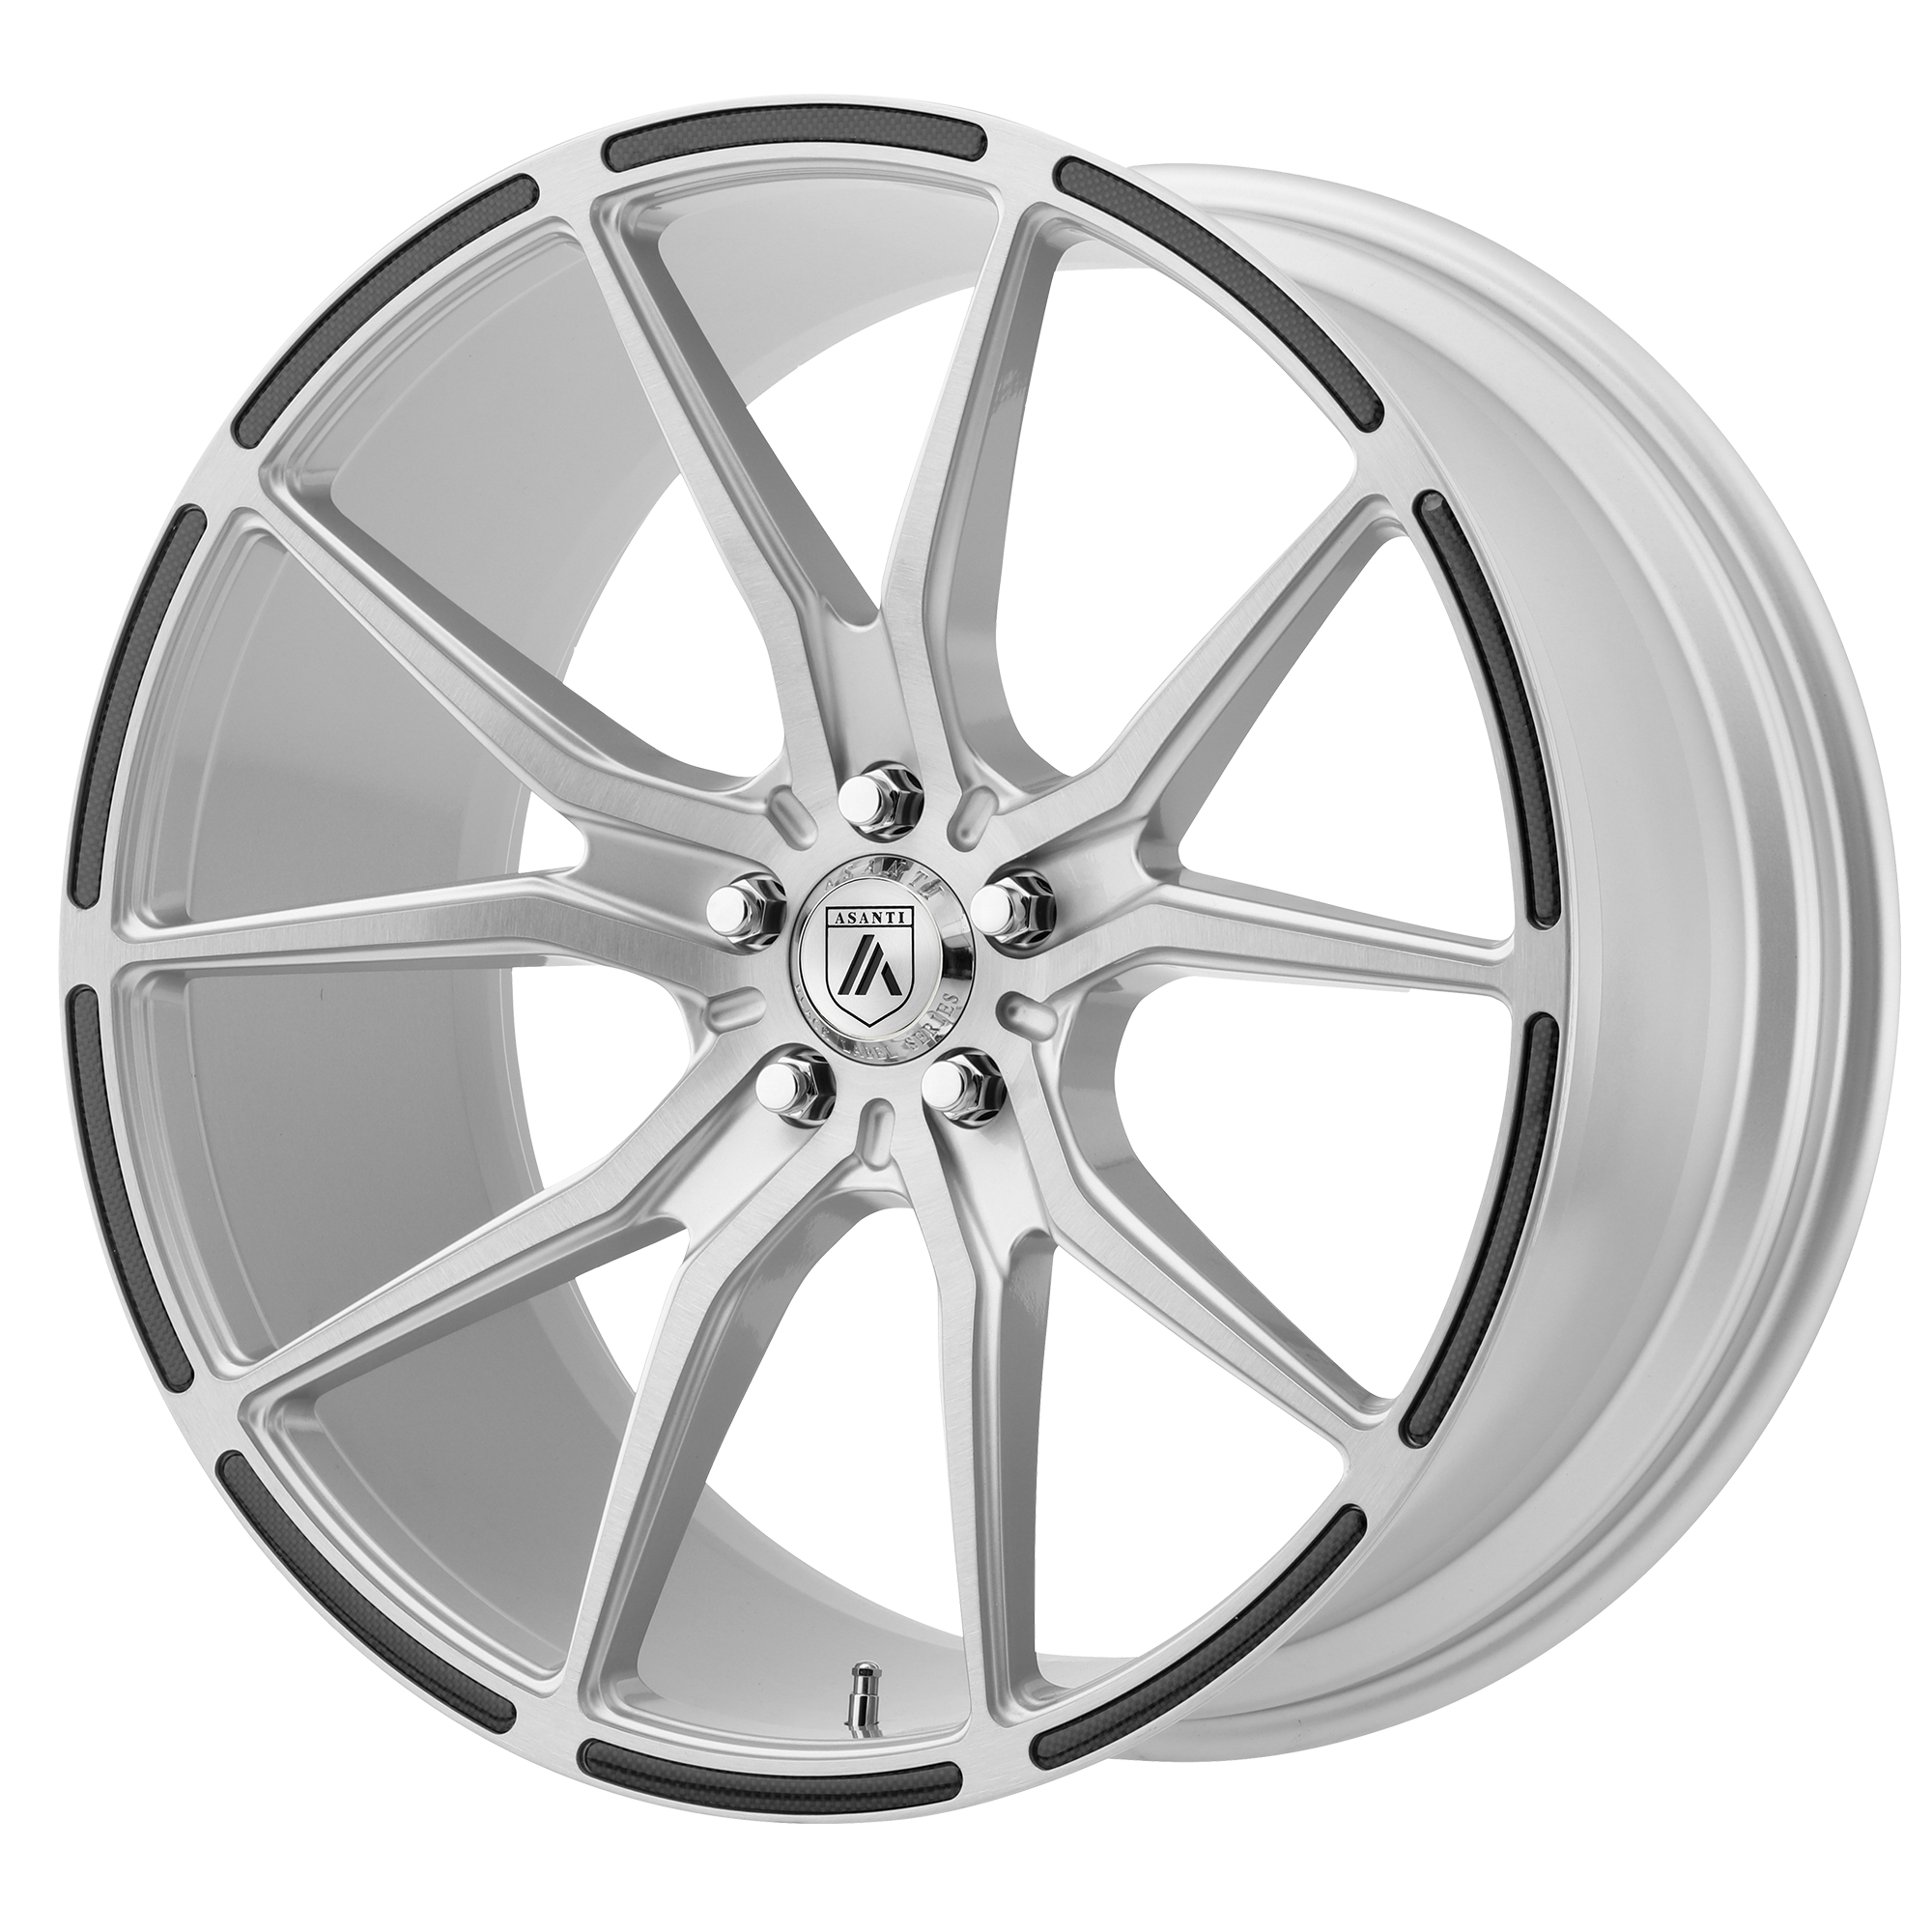 VEGA 22x9 Blank BRUSHED SILVER W/ CARBON FIBER INSERTS (15.00 - 31.00 mm) - Tires and Engine Performance